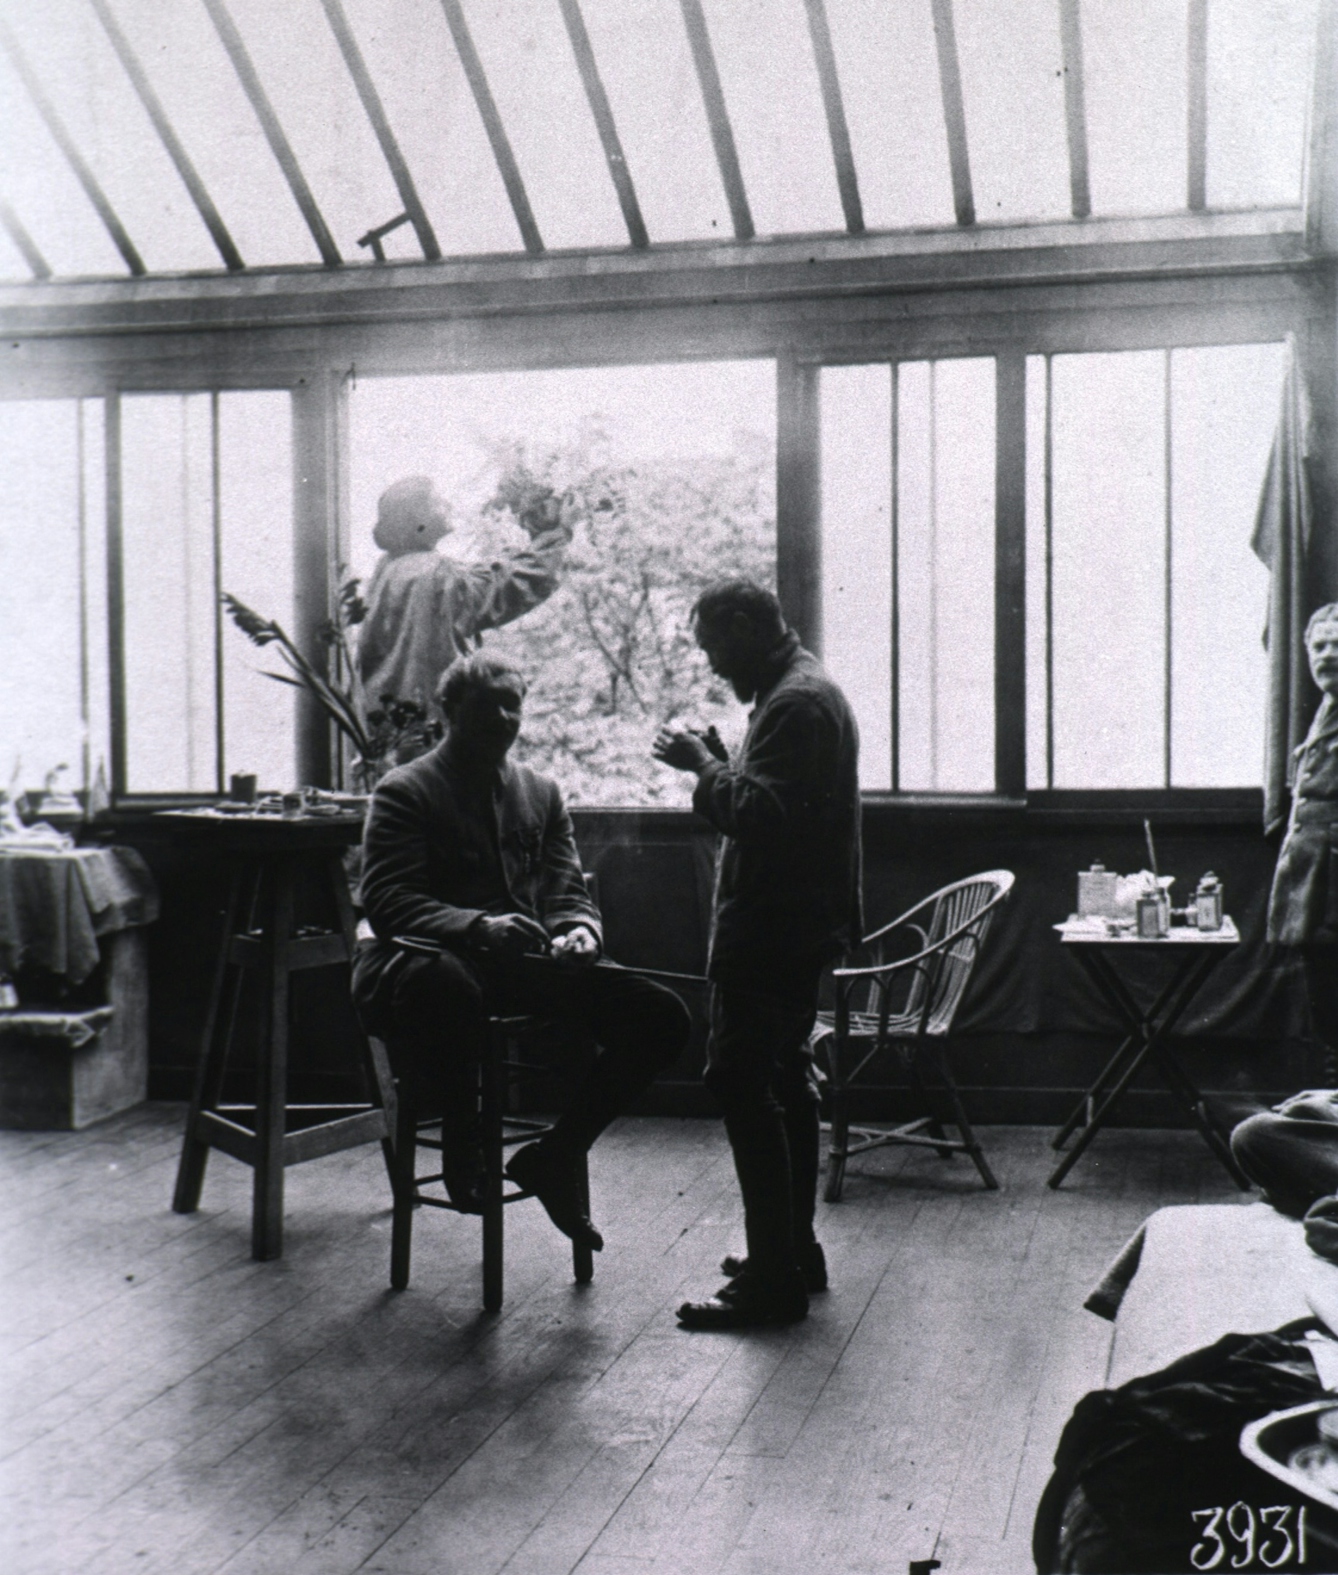 Black and white photograoh of a sunlit stiudio with two standing figures and one seated figure.